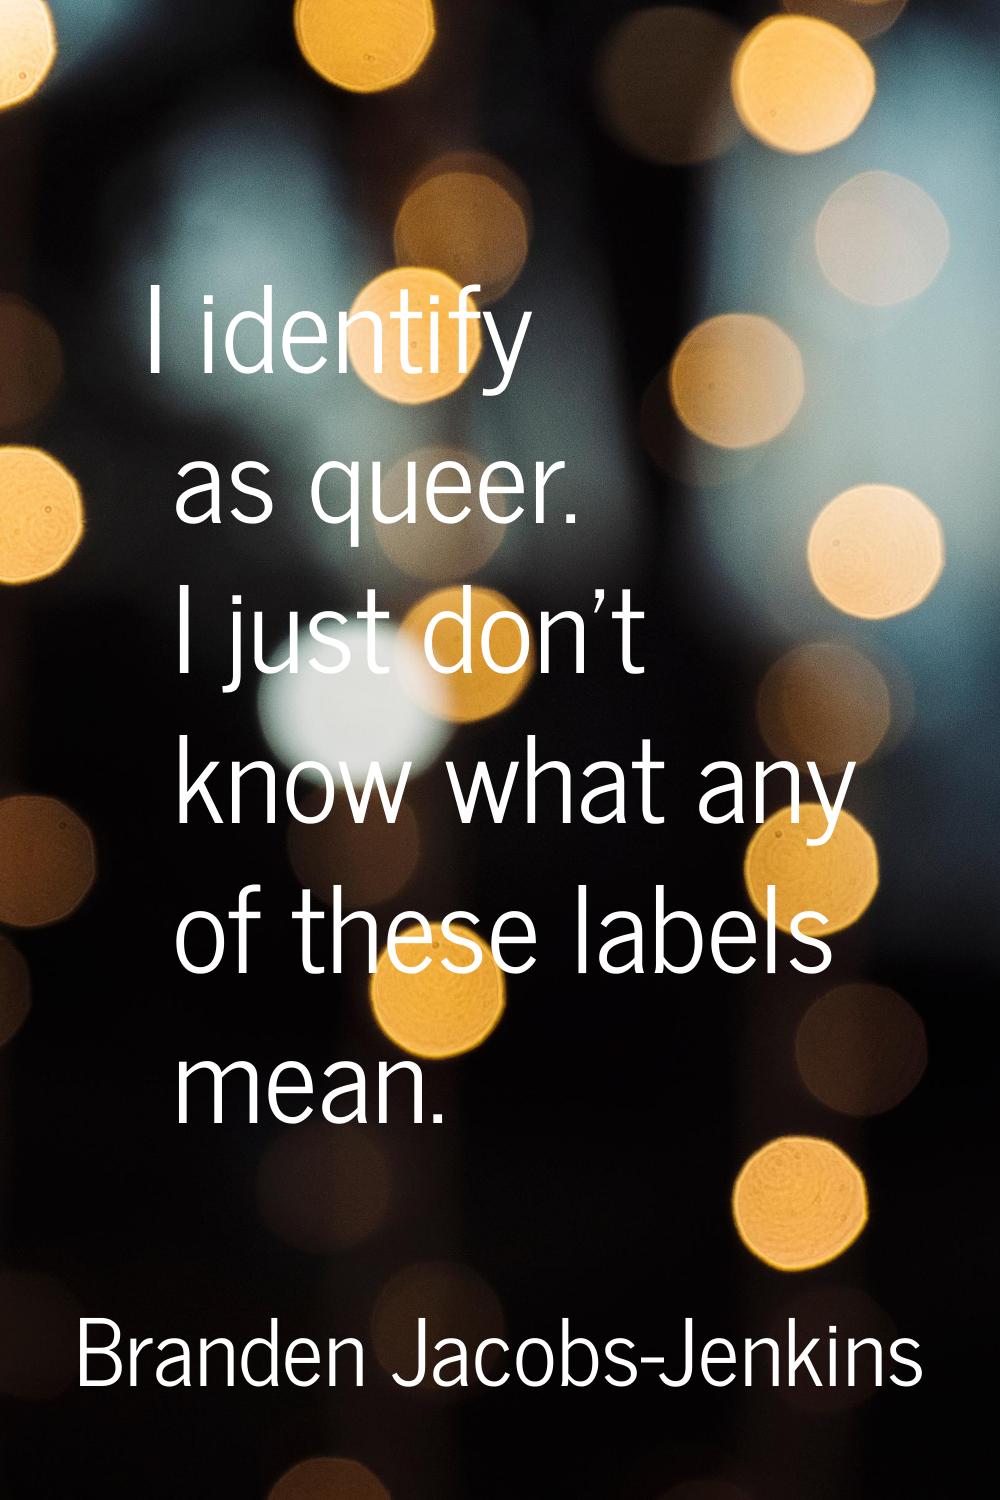 I identify as queer. I just don't know what any of these labels mean.